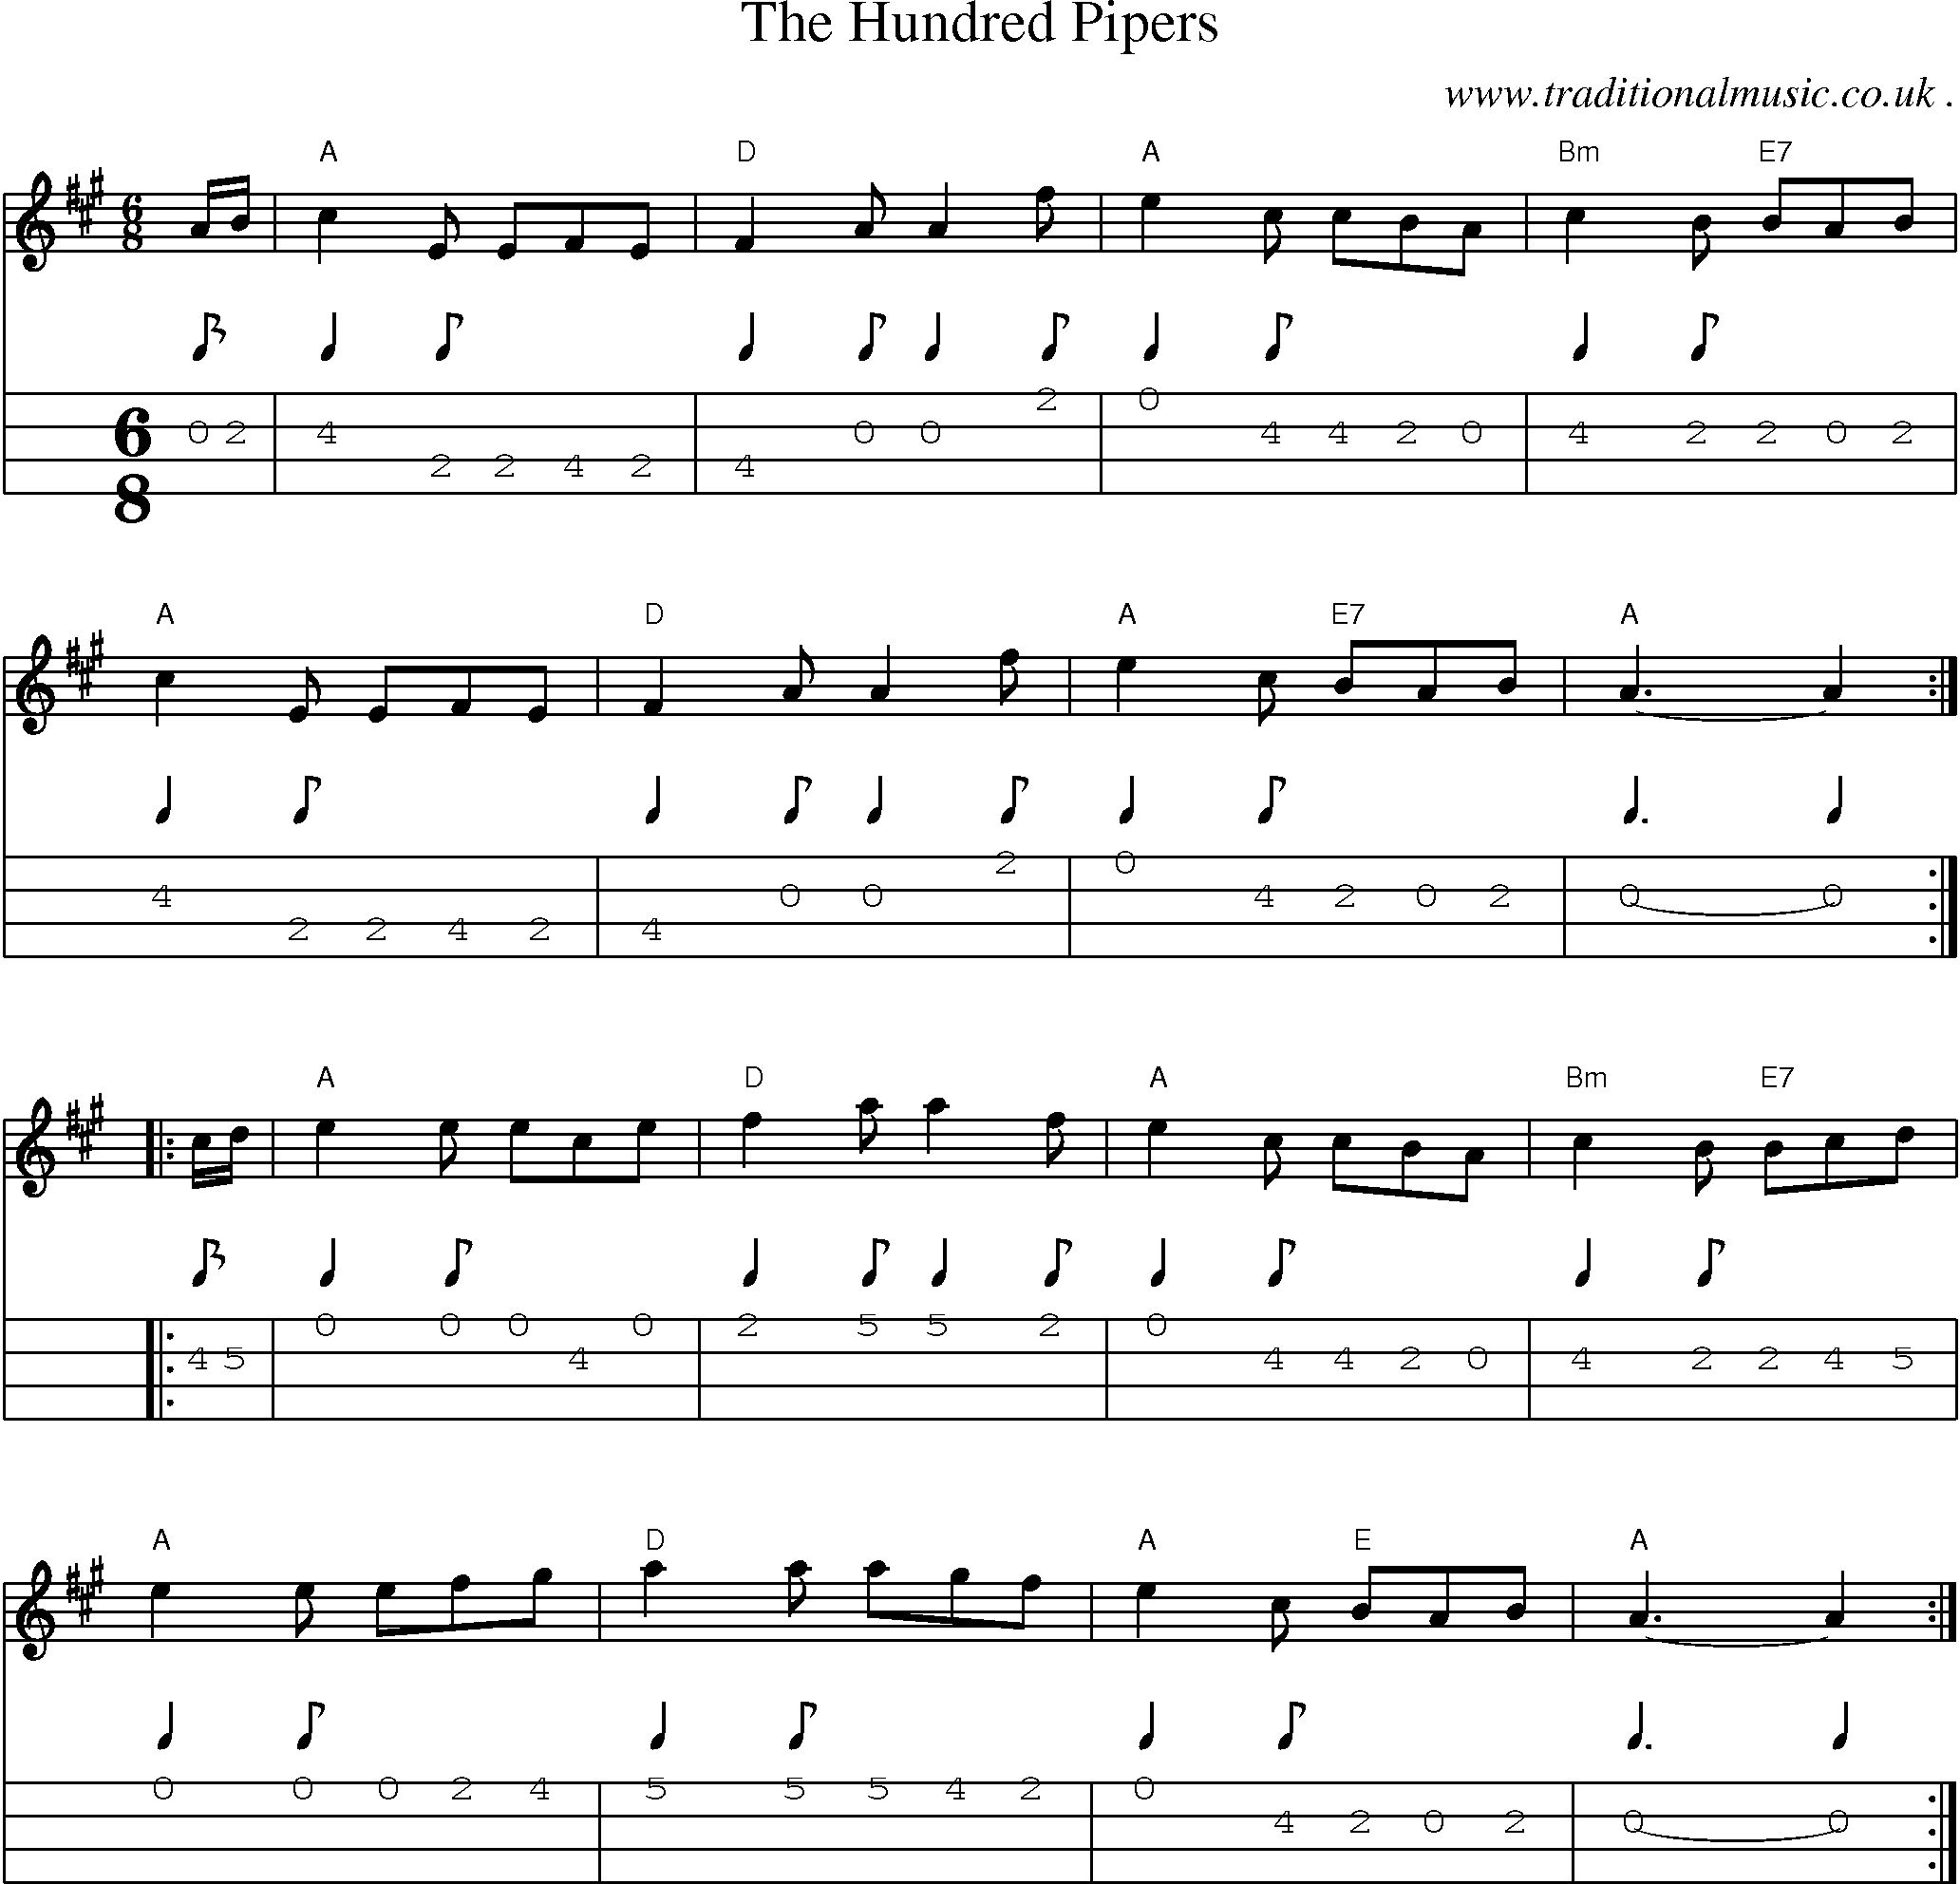 Sheet-music  score, Chords and Mandolin Tabs for The Hundred Pipers